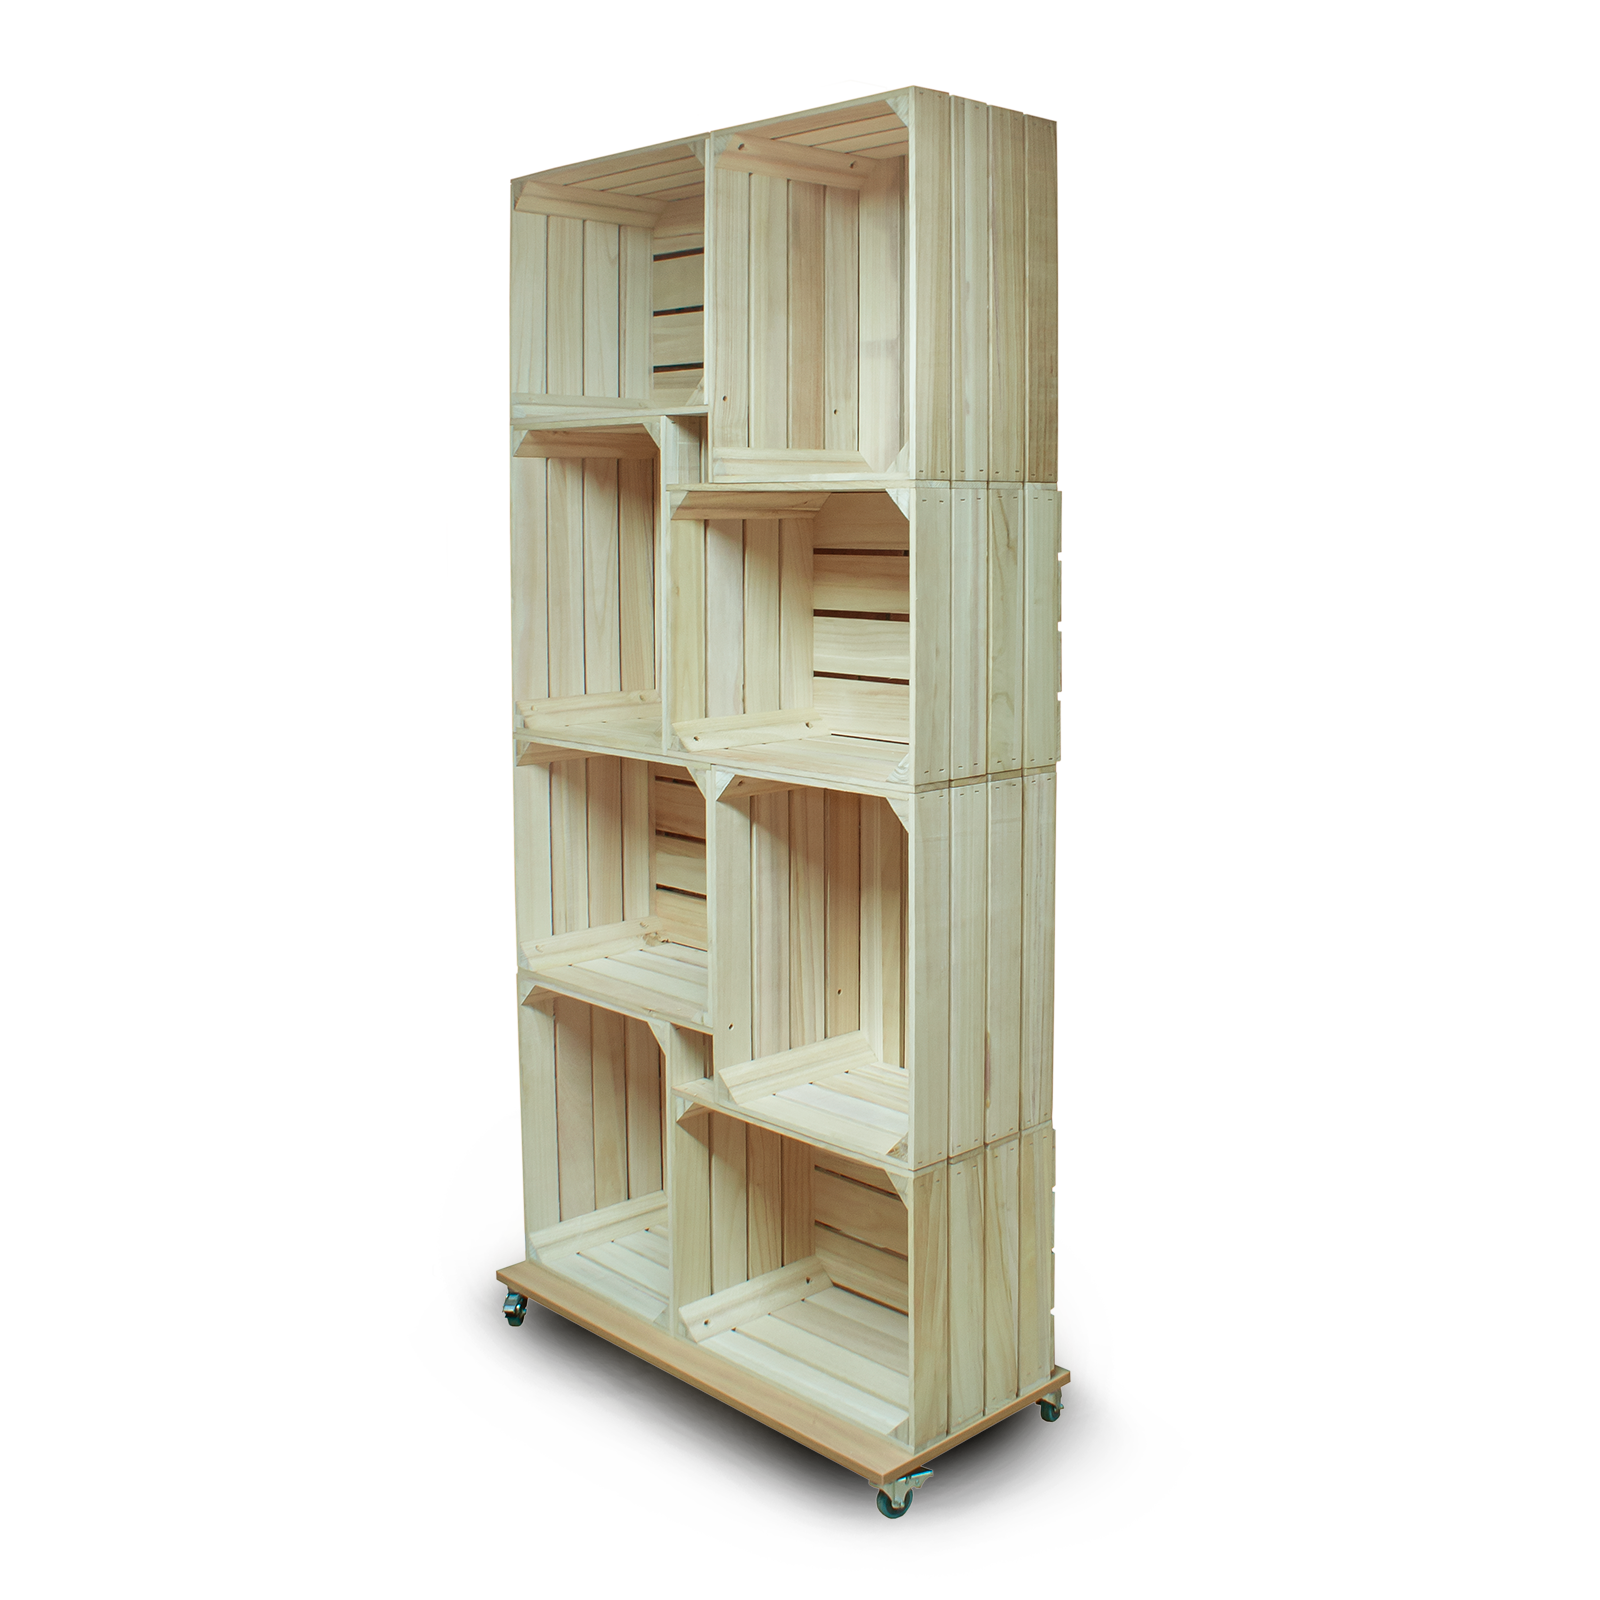 Crate Store - 8 Crate Shelving Display with Optional Base (CRATE/2)